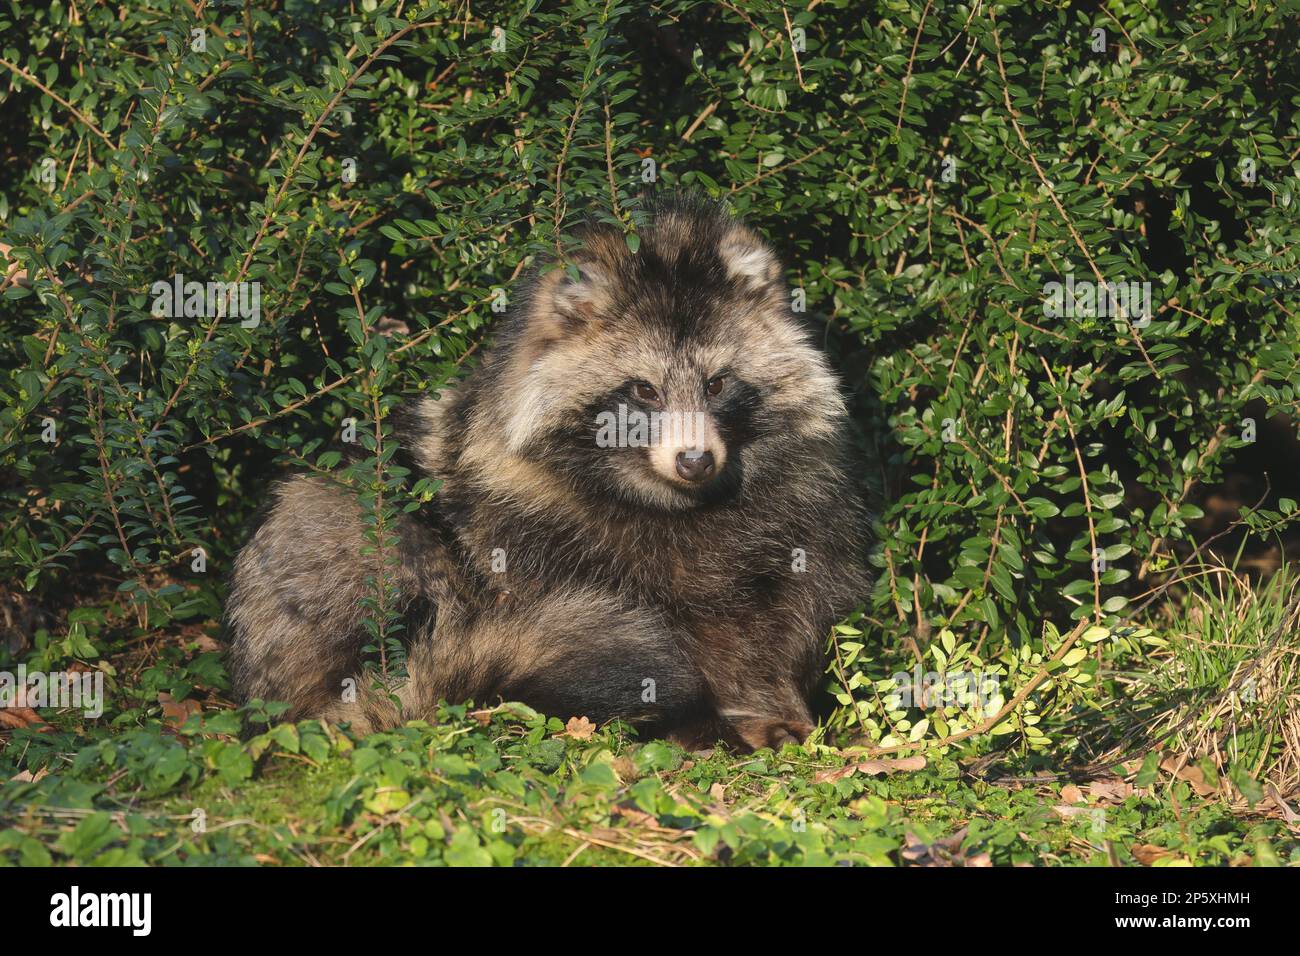 raccoon dog (Nyctereutes procyonoides), sitting in the shrubbery, front view, Germany Stock Photo